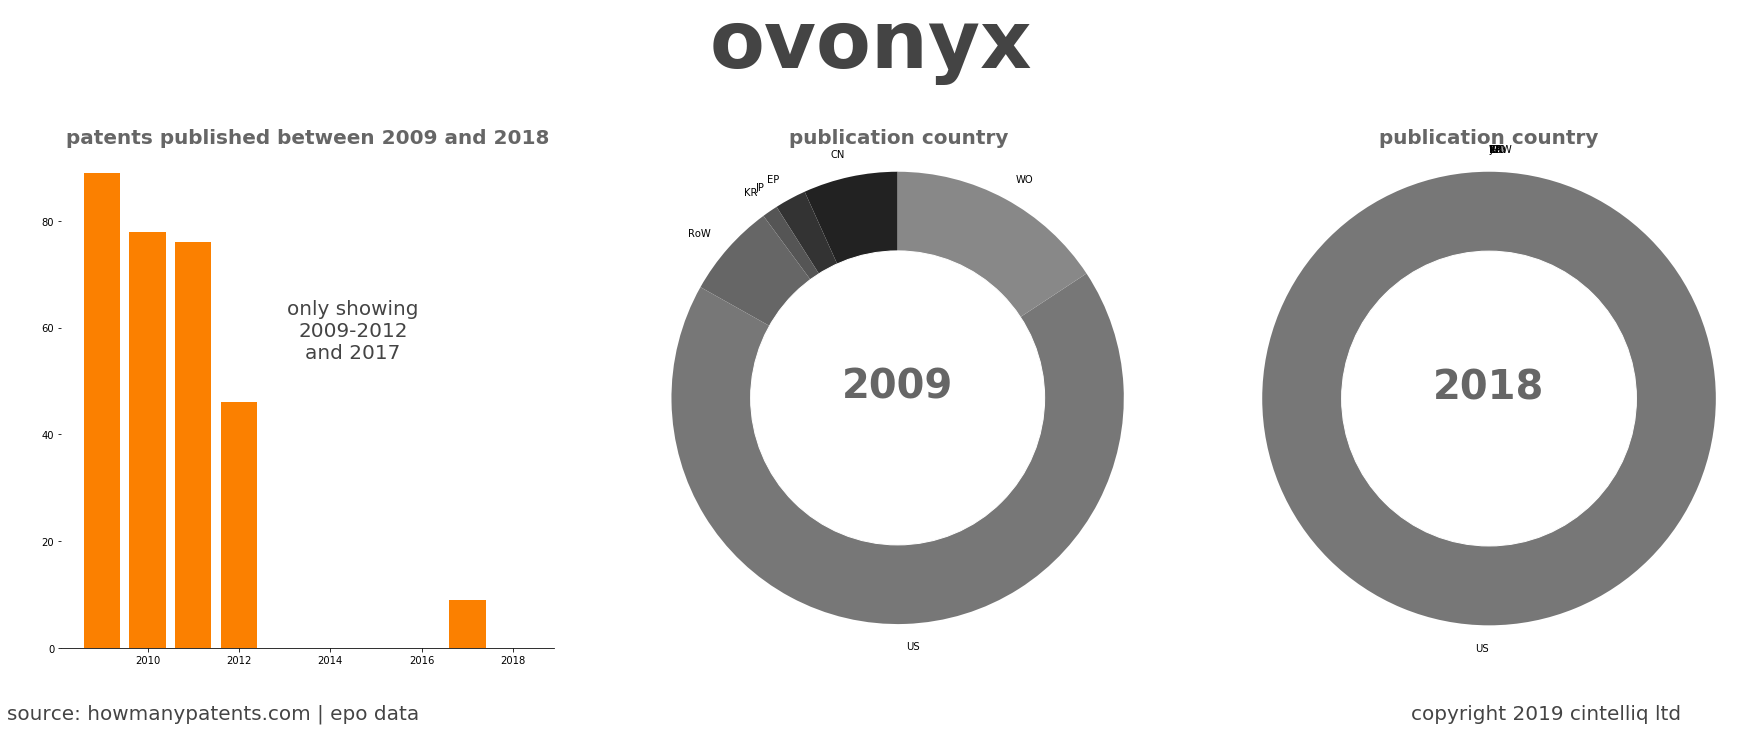 summary of patents for Ovonyx